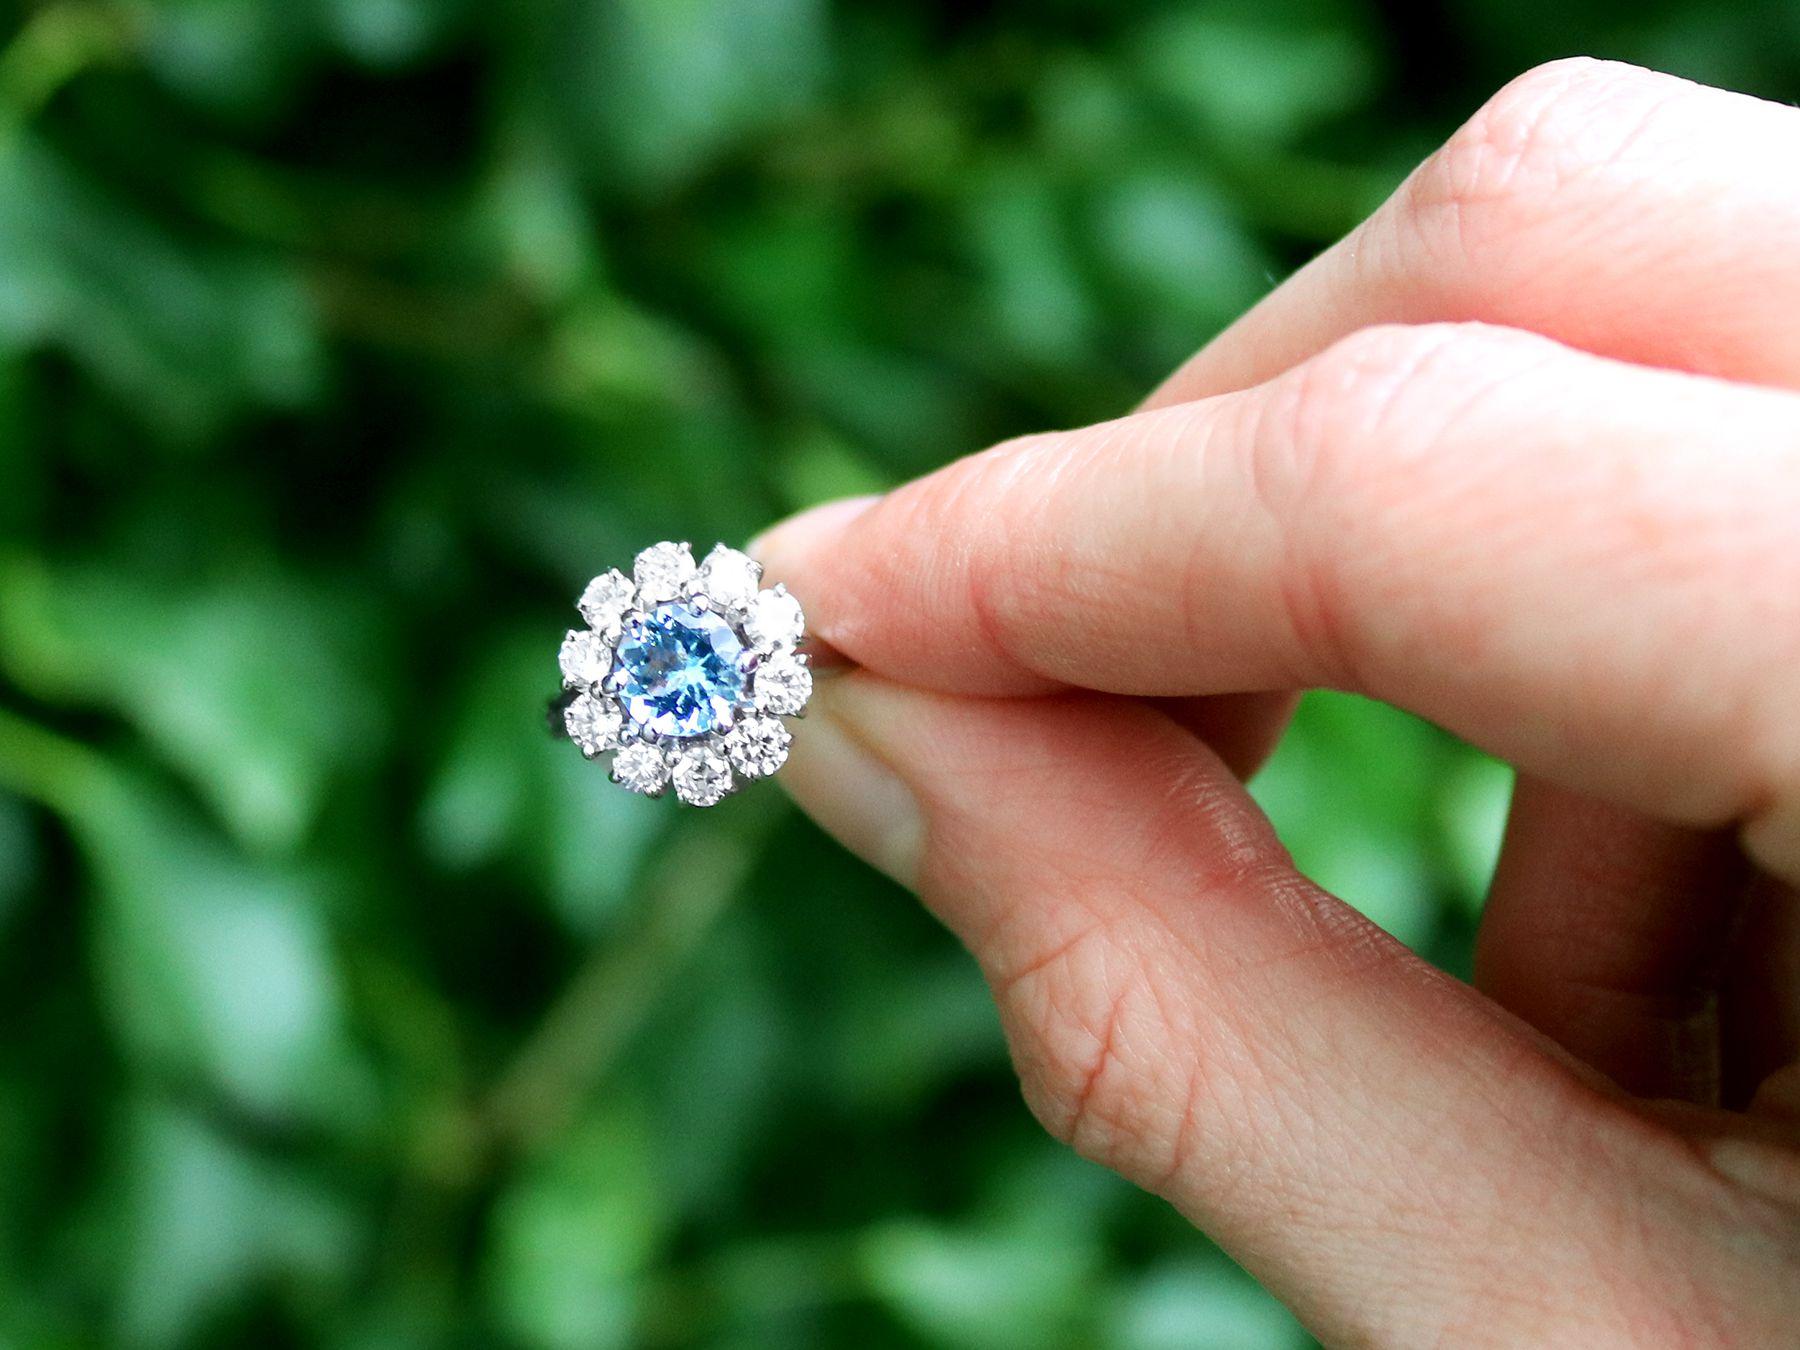 A fine and impressive 0.77 carat aquamarine and 0.75 carat diamond, 18 karat white gold dress ring; part of our diverse collection of vintage jewelry and estate jewelry.

This stunning, fine and impressive vintage aquamarine ring has been crafted in